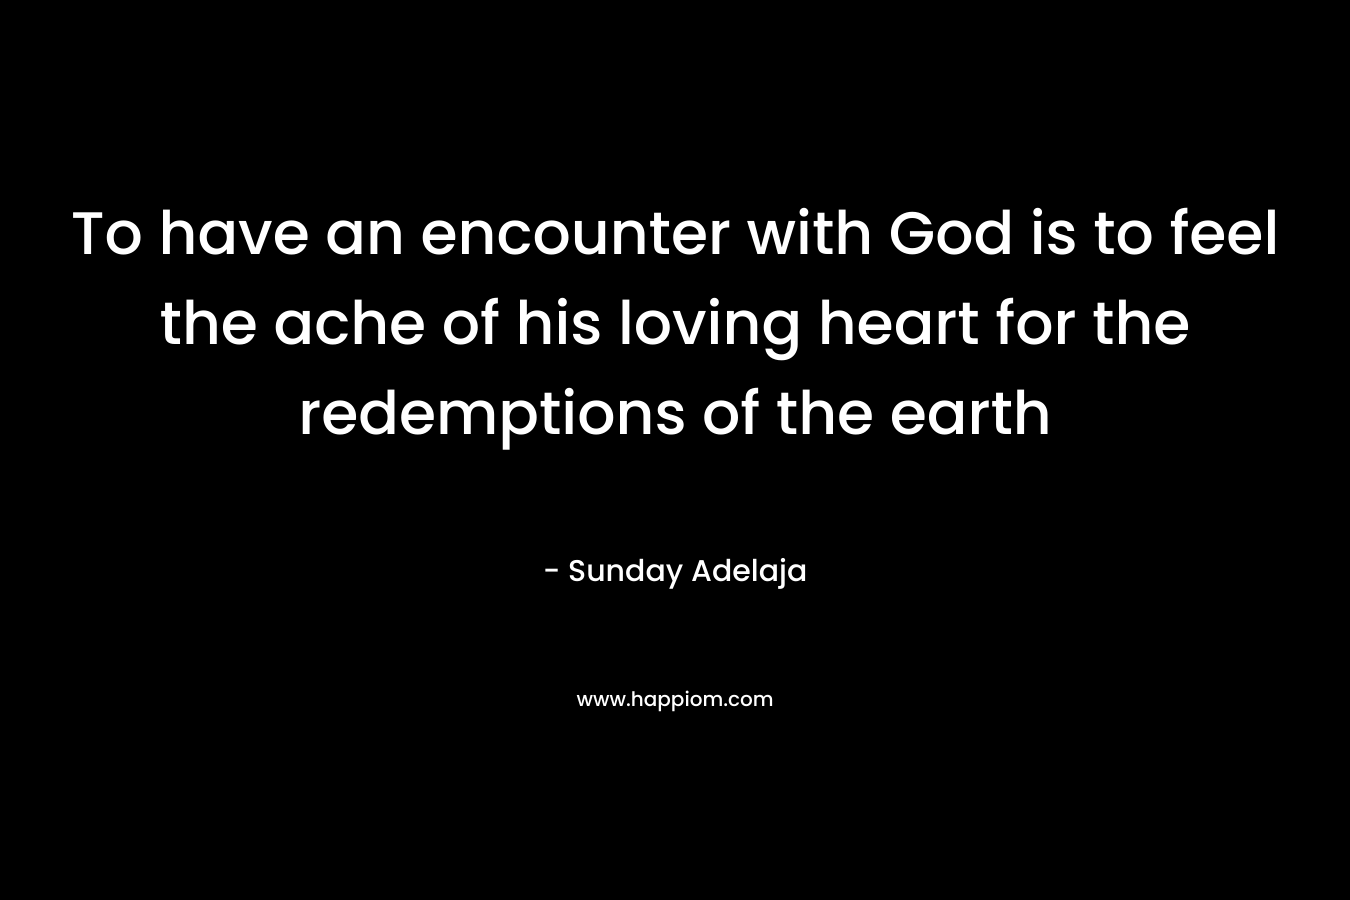 To have an encounter with God is to feel the ache of his loving heart for the redemptions of the earth – Sunday Adelaja